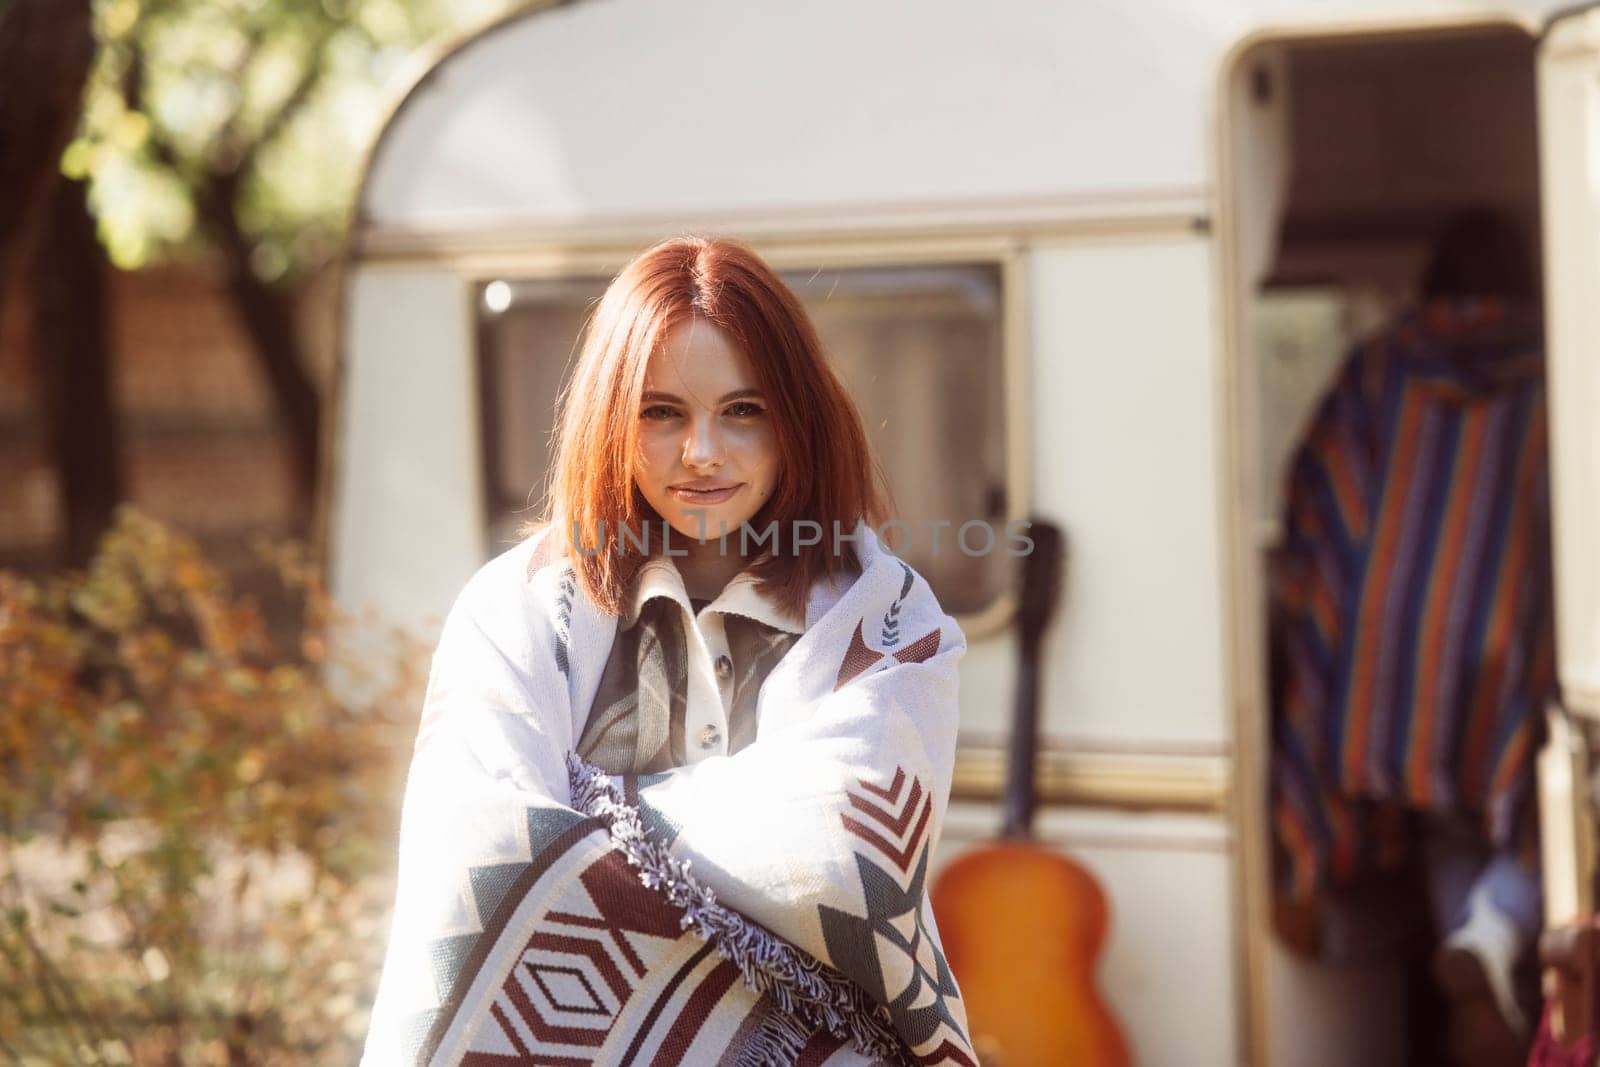 A captivating girl showcases her hippie-inspired look against the park landscape, with a trailer nearby. High quality photo